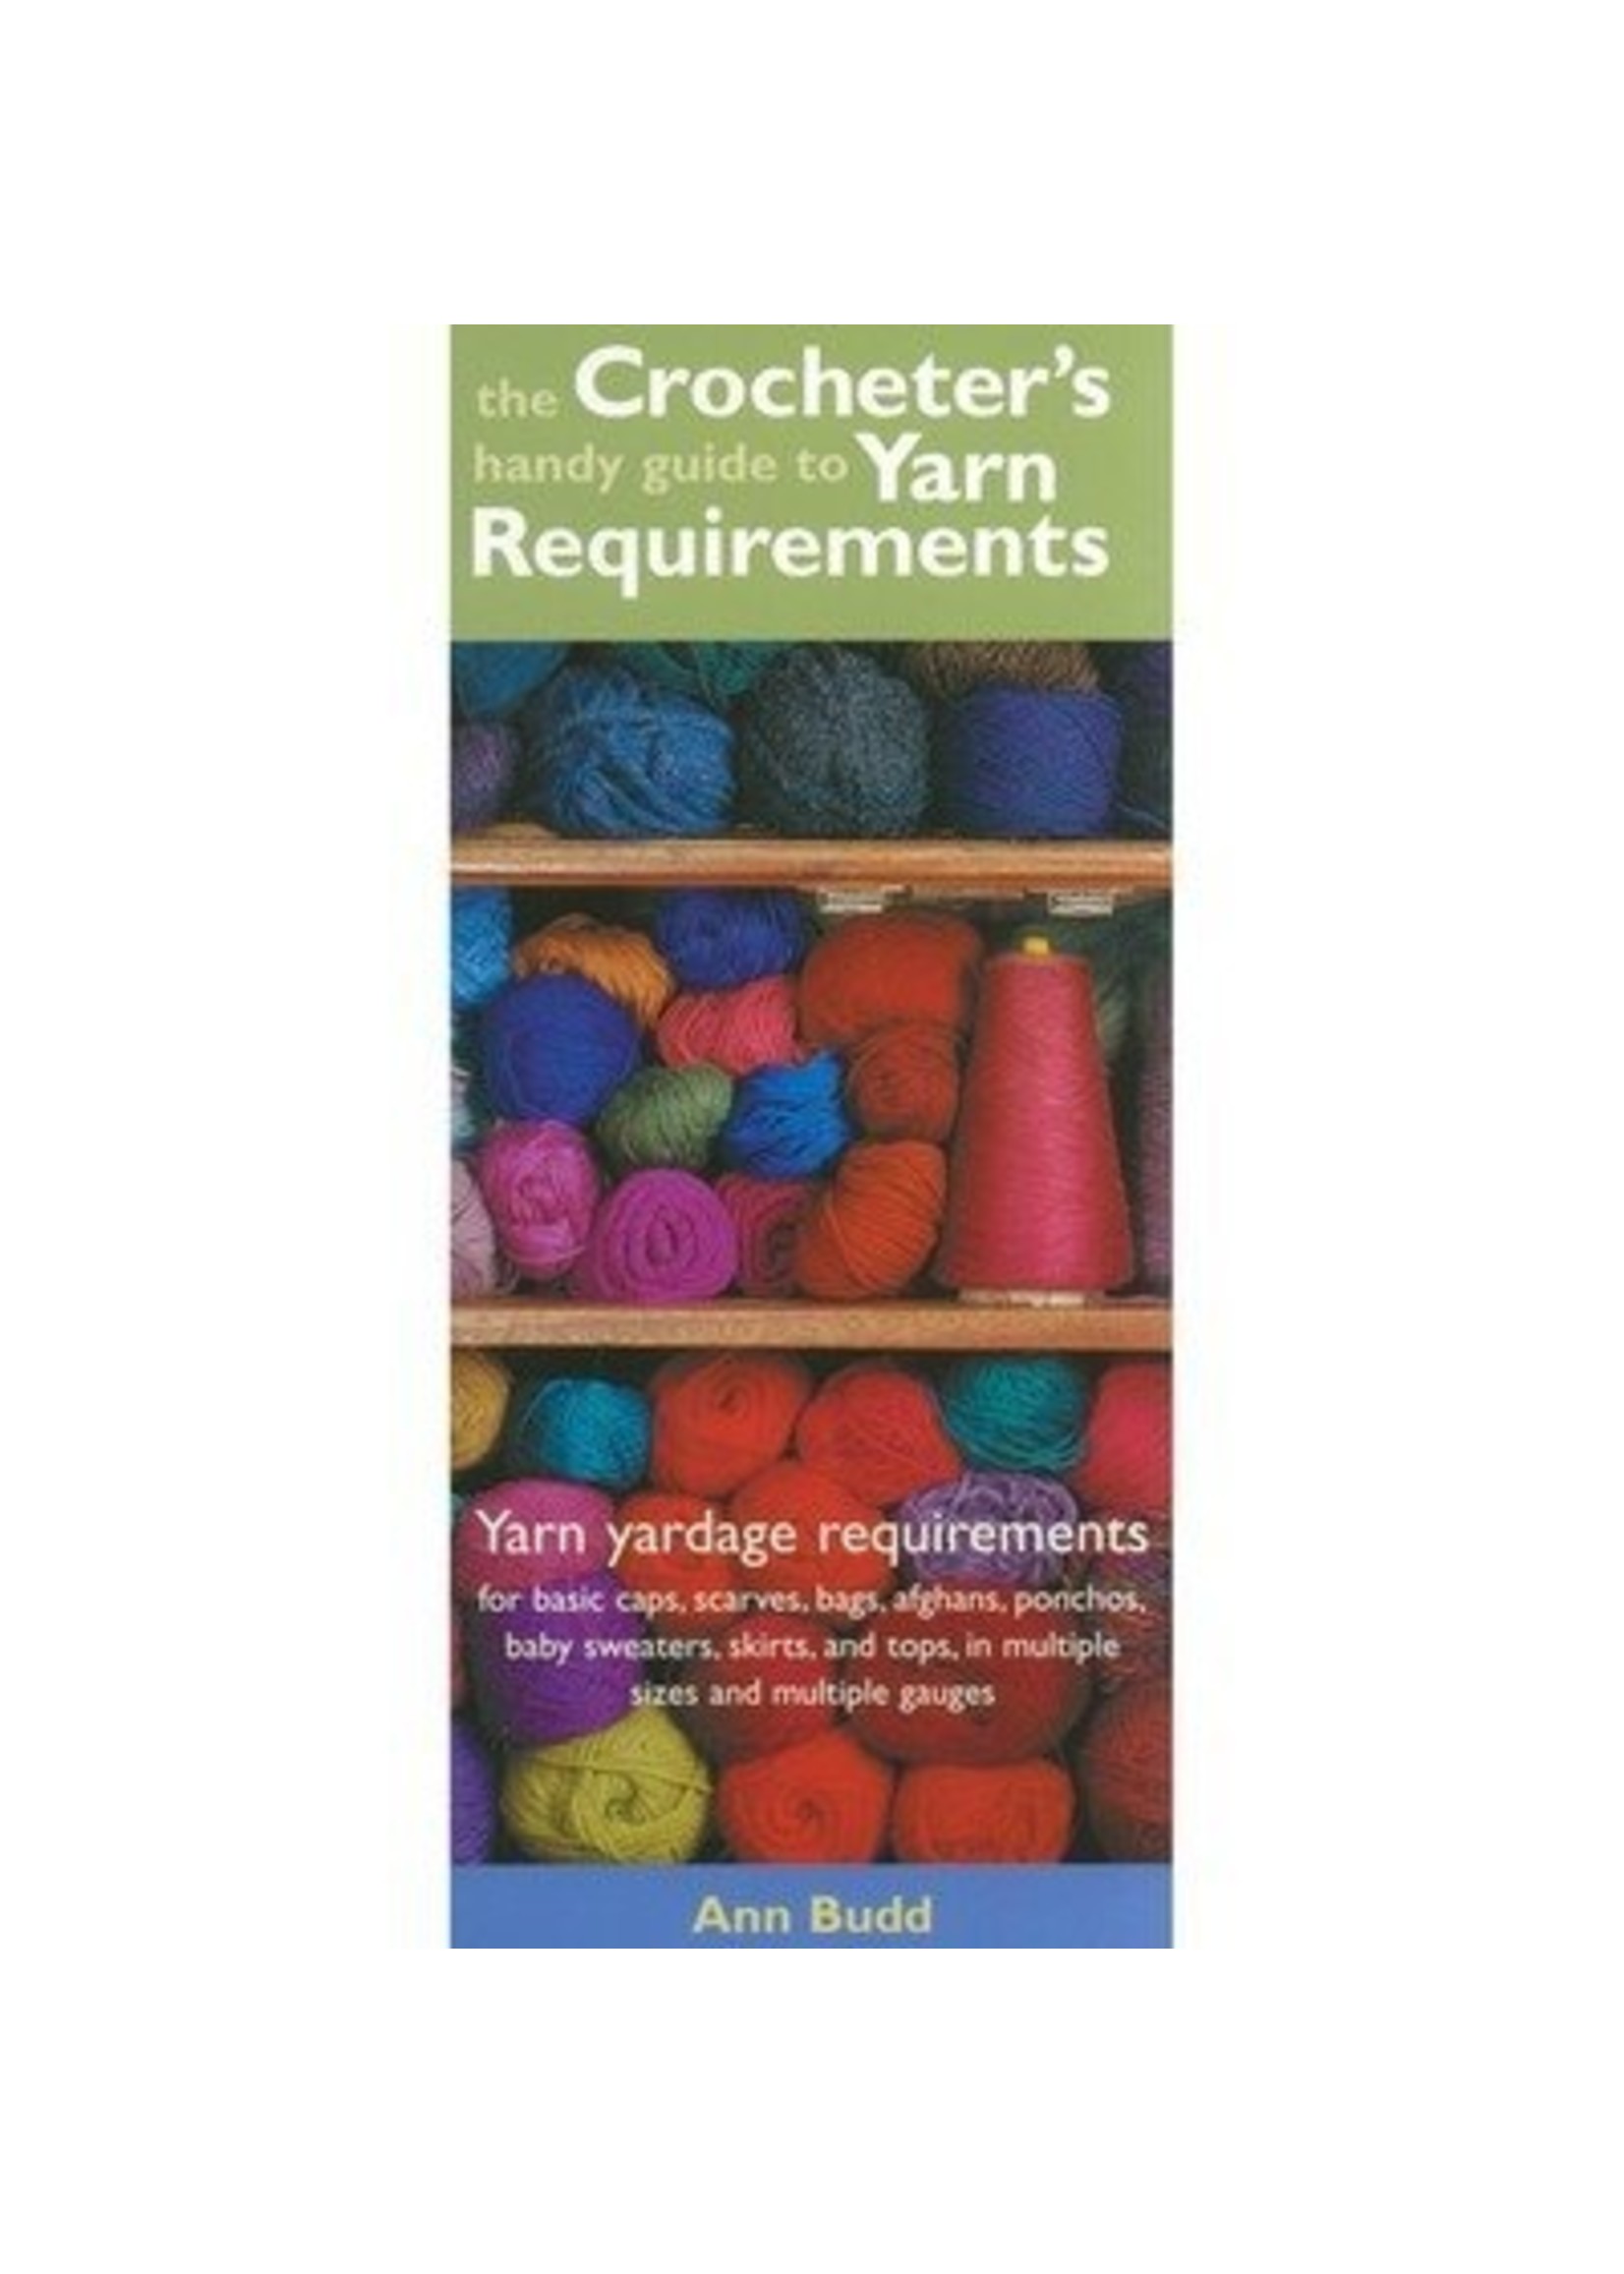 Crocheter's Yarn Requirements Guide